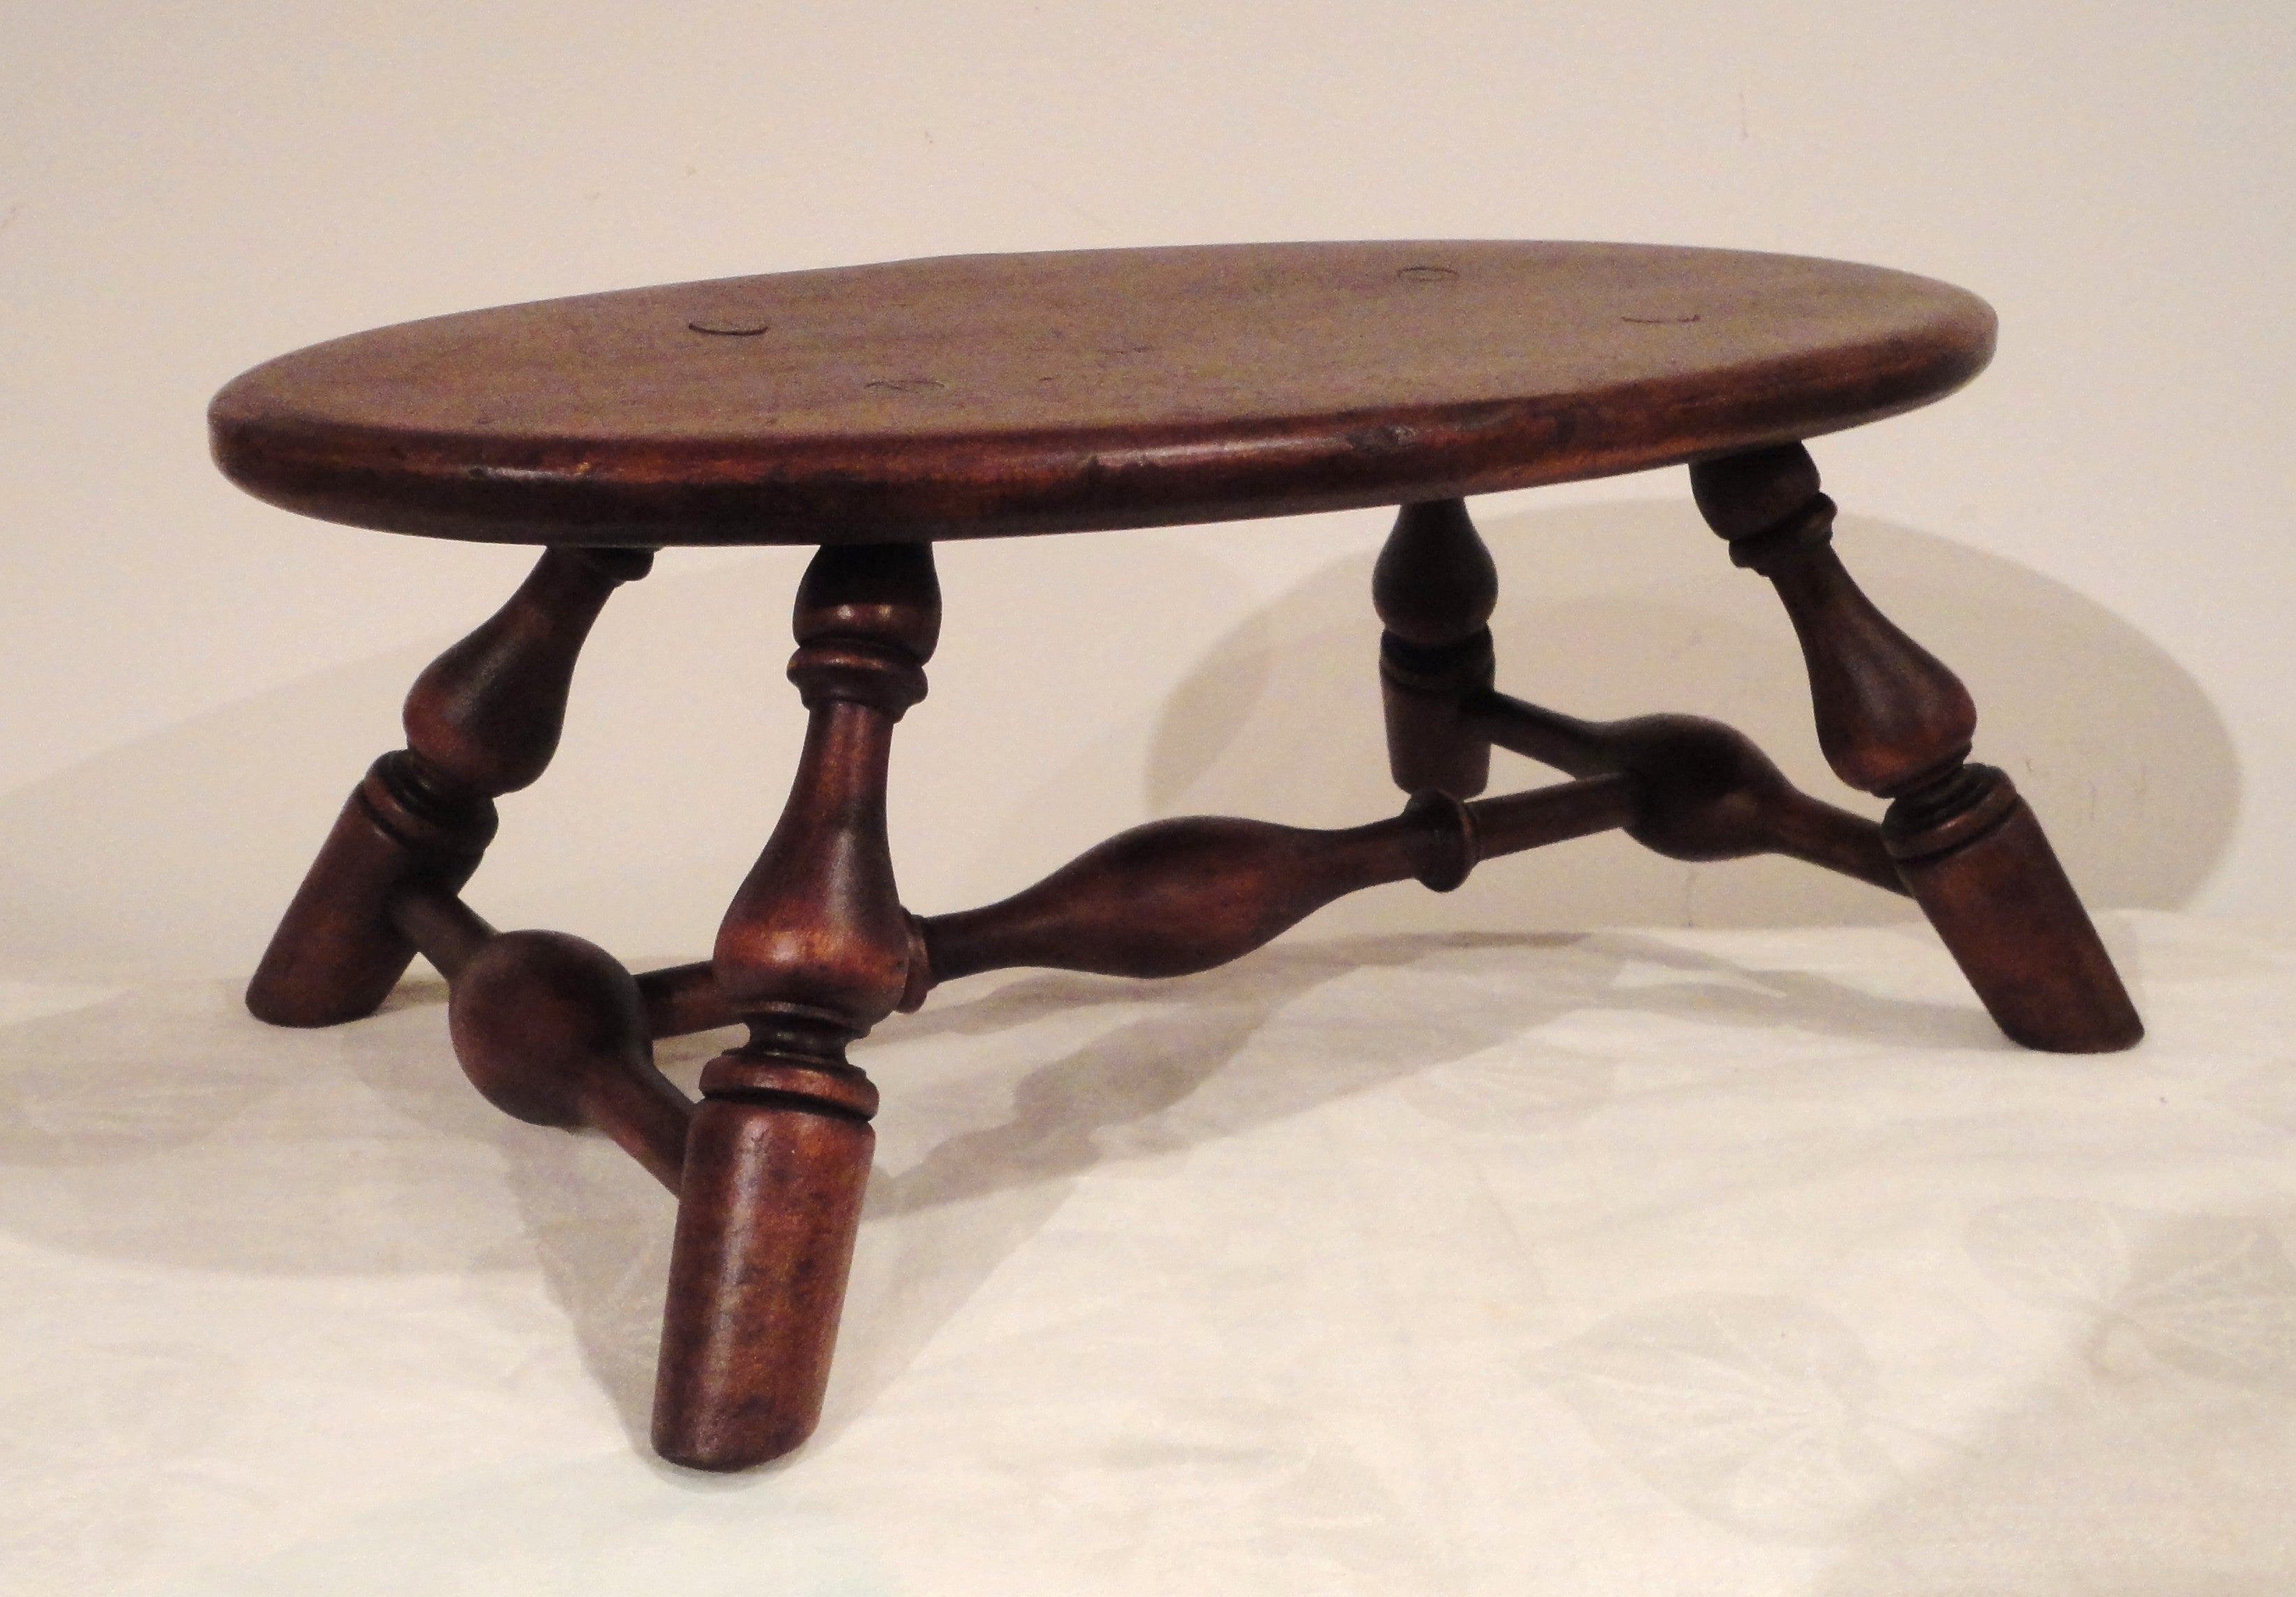 19thc Windsor Foot Stool From New England/Signed By The Maker